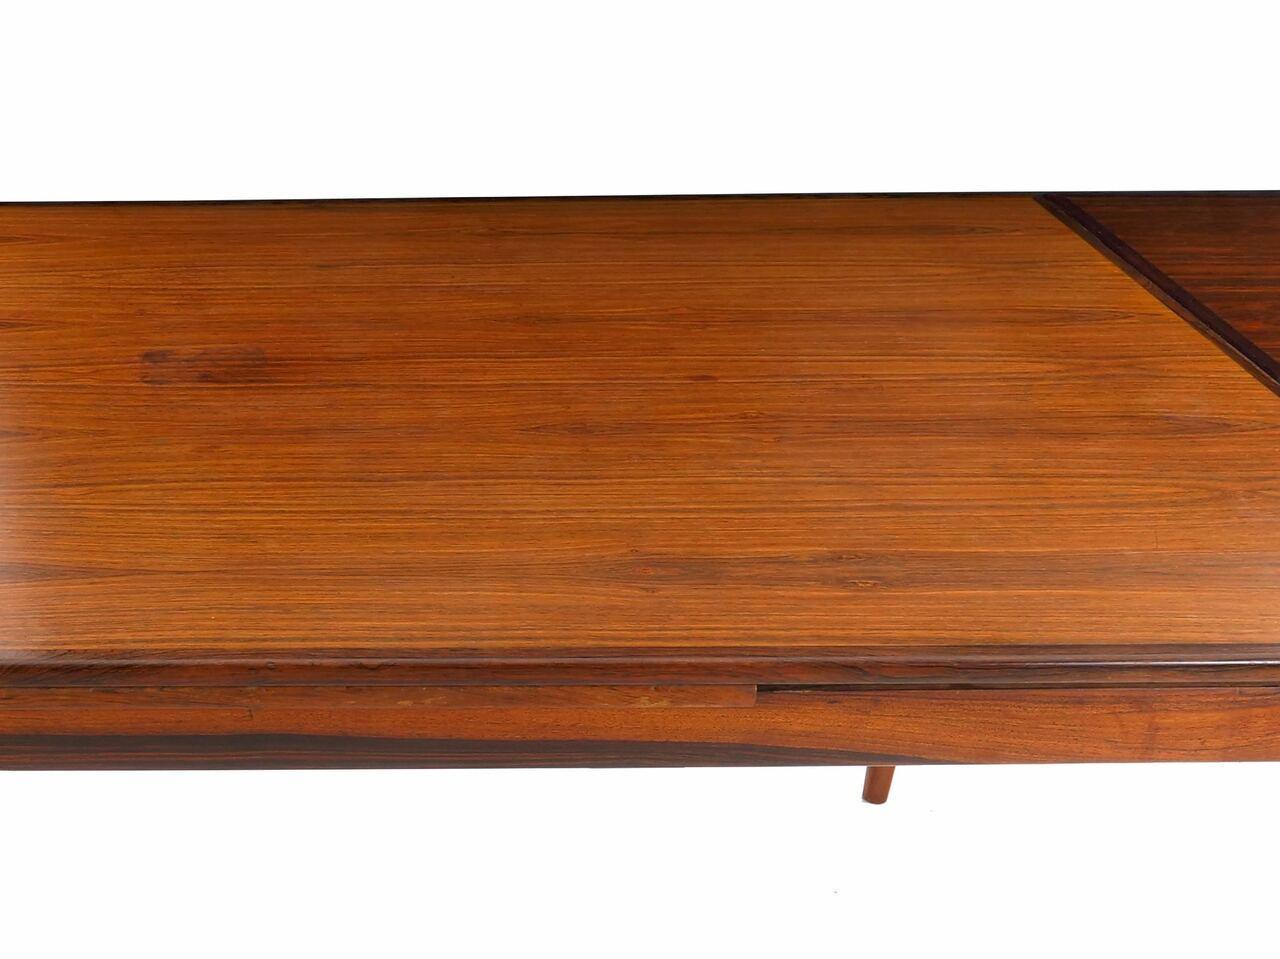 Danish Mid-Century Modern Rosewood Dining Table by Niels Møller, Model No. 254 9